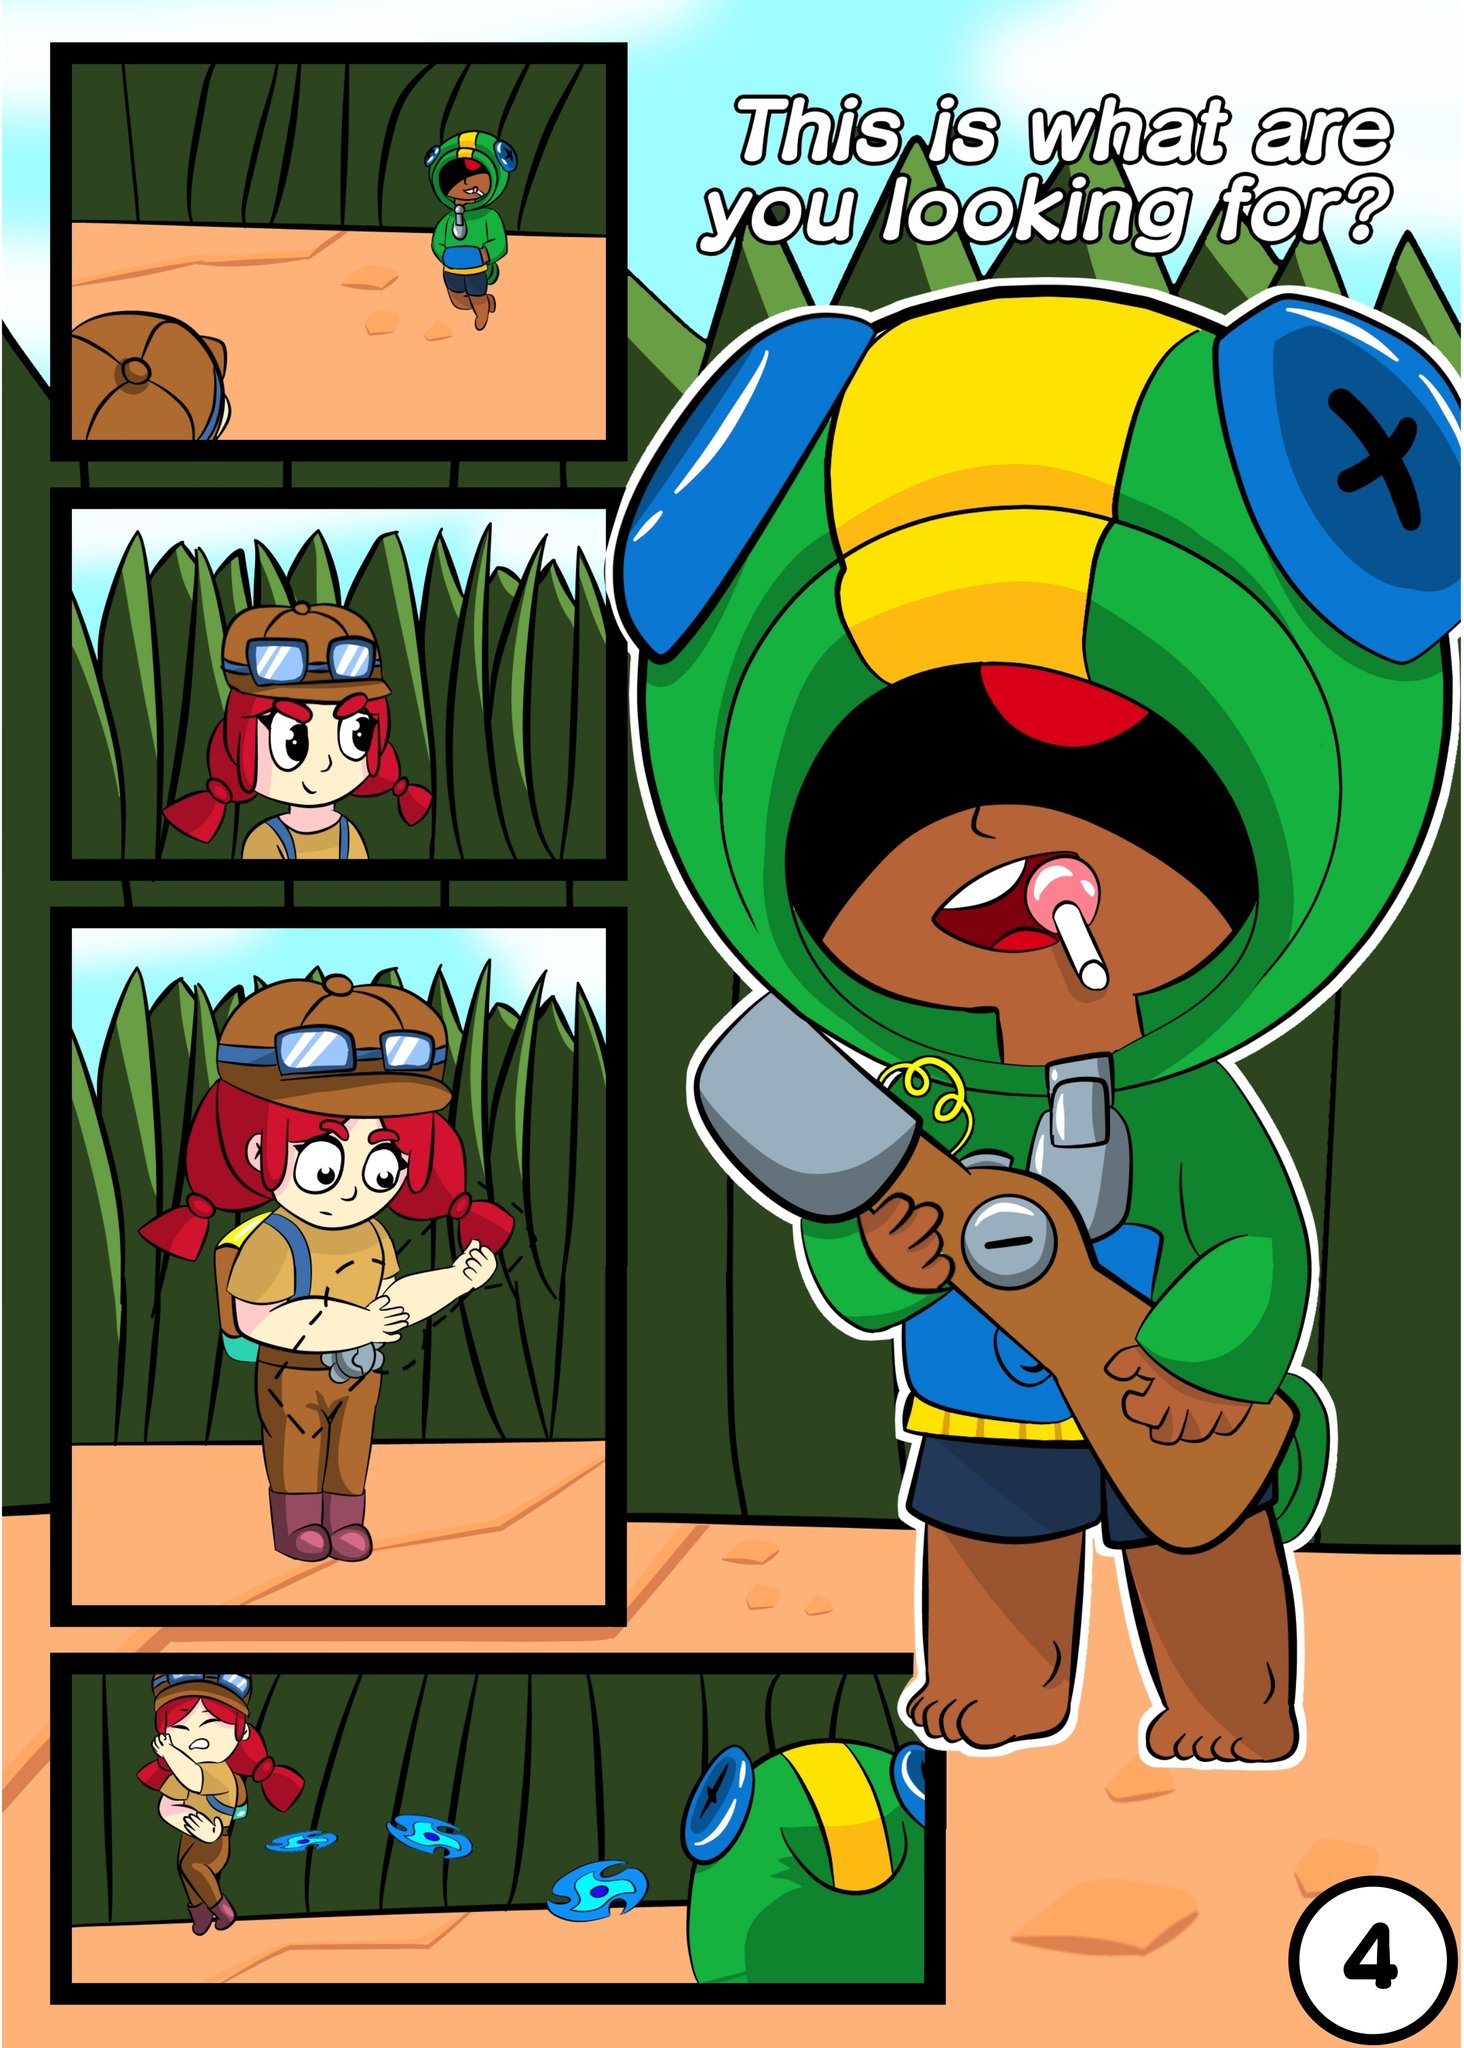 Leinad On Twitter First Pages Of Mi Brawl Stars Comic 18 I Will Update It Every Time I Can All The Pages Are Made In Phone Https T Co 3g0aqdbigj Twitter - comics 18 brawl stars